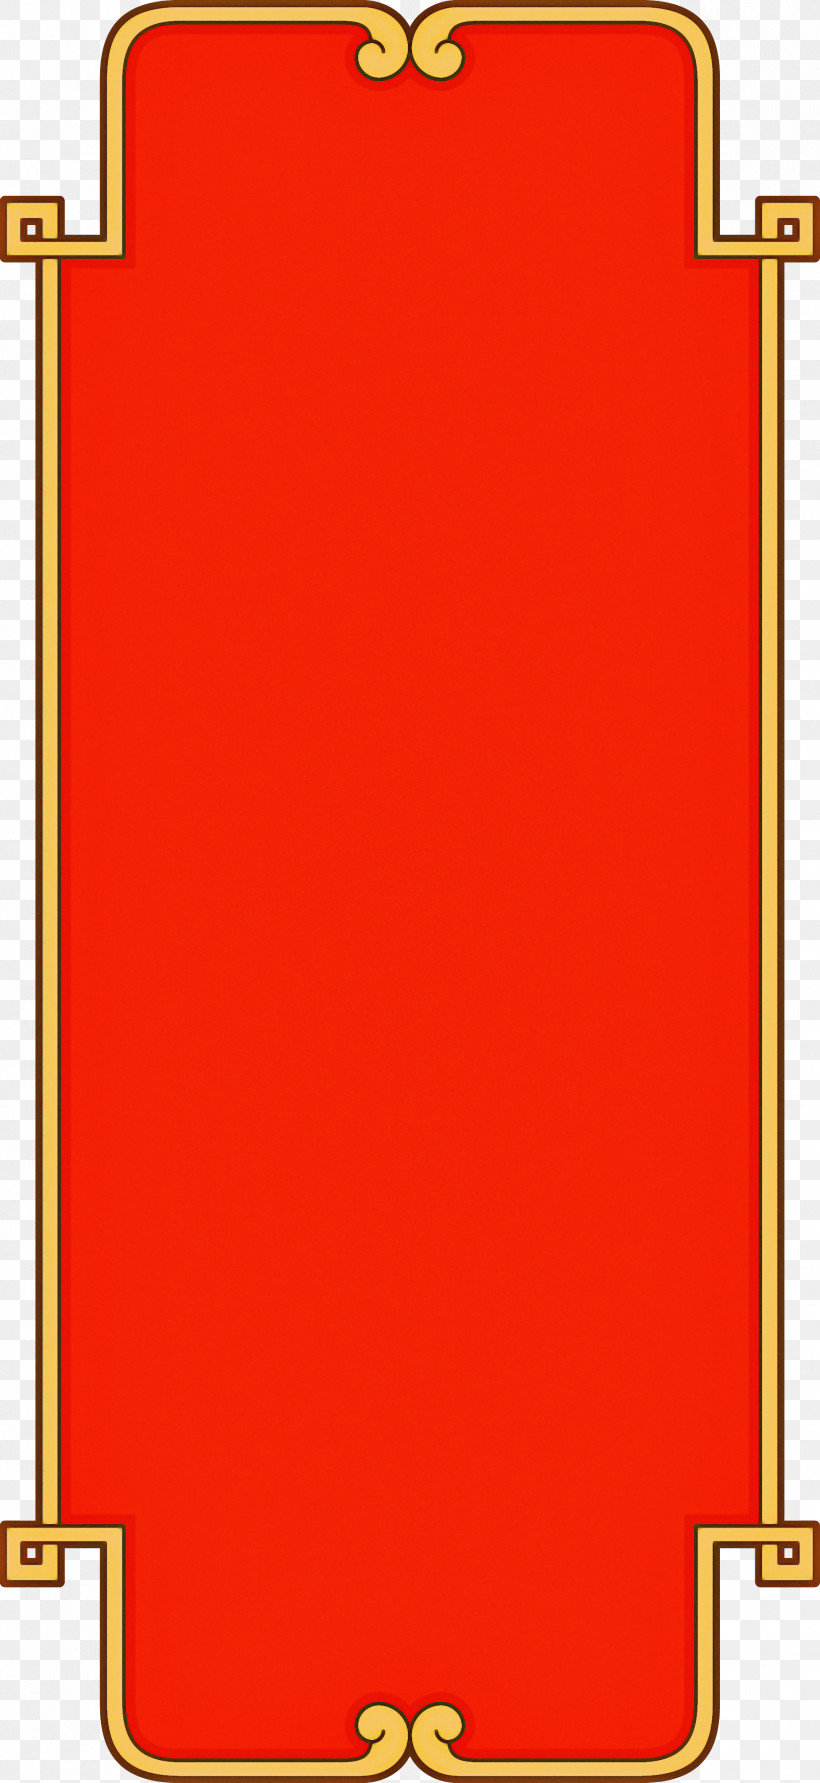 Simple Frame, PNG, 1811x3939px, Simple Frame, Orange, Rectangle, Red, Square Download Free